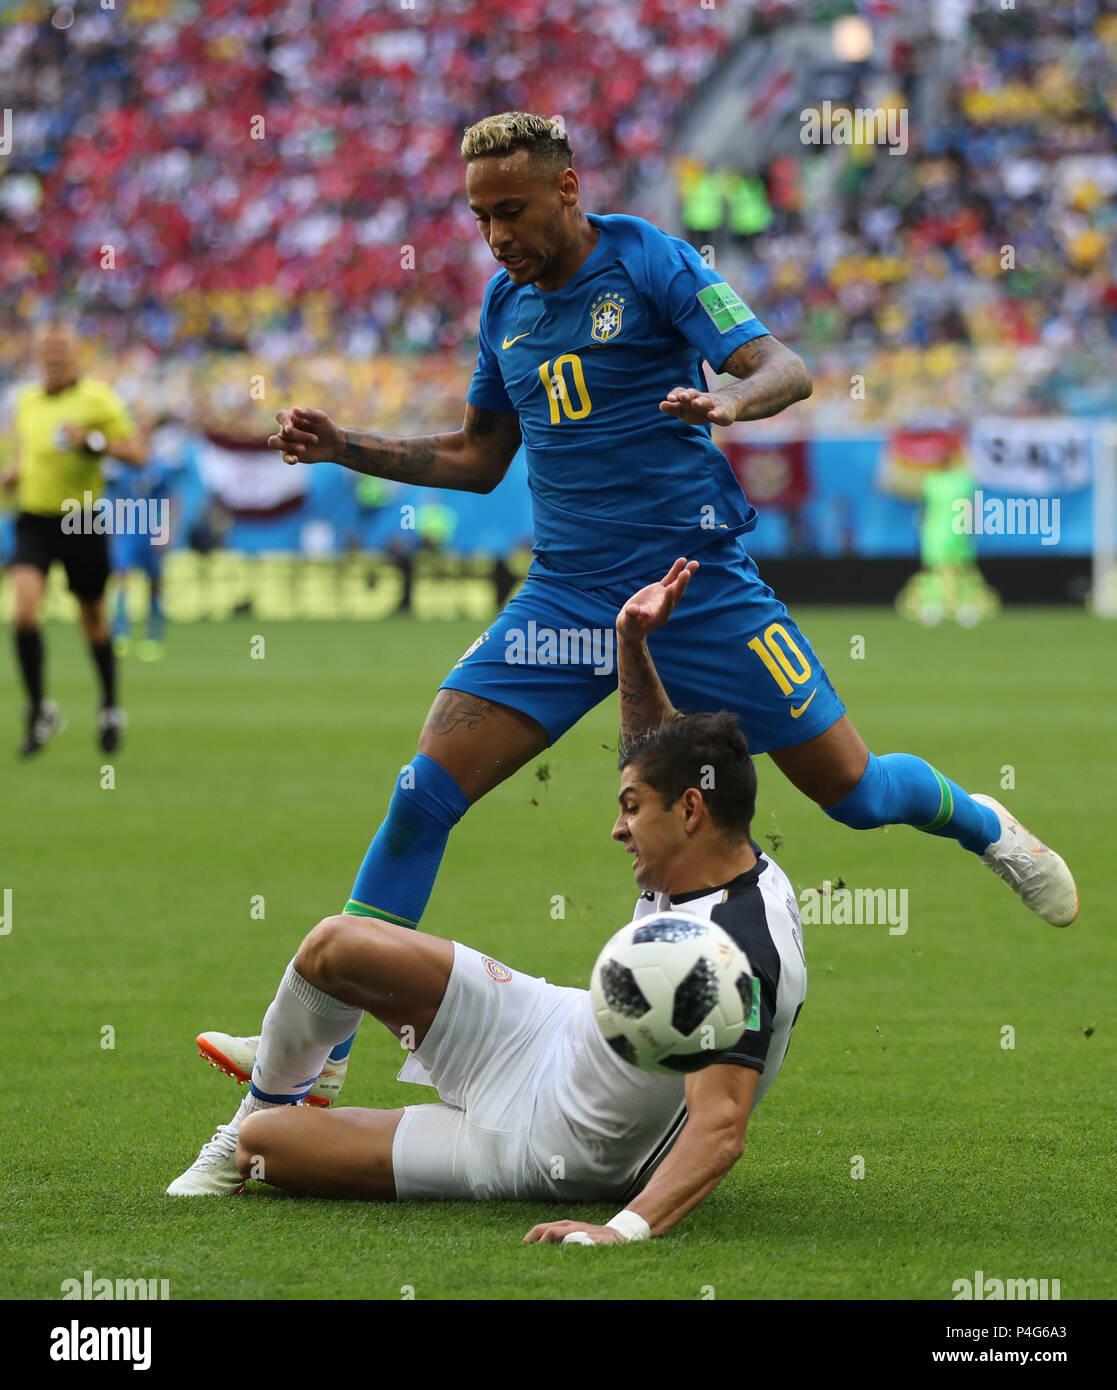 Saint Petersburg, Russia. 22nd June, 2018. Neymar (top) of Brazil vies with Cristian Gamboa of Costa Rica during the 2018 FIFA World Cup Group E match between Brazil and Costa Rica in Saint Petersburg, Russia, June 22, 2018. Credit: Cao Can/Xinhua/Alamy Live News Stock Photo